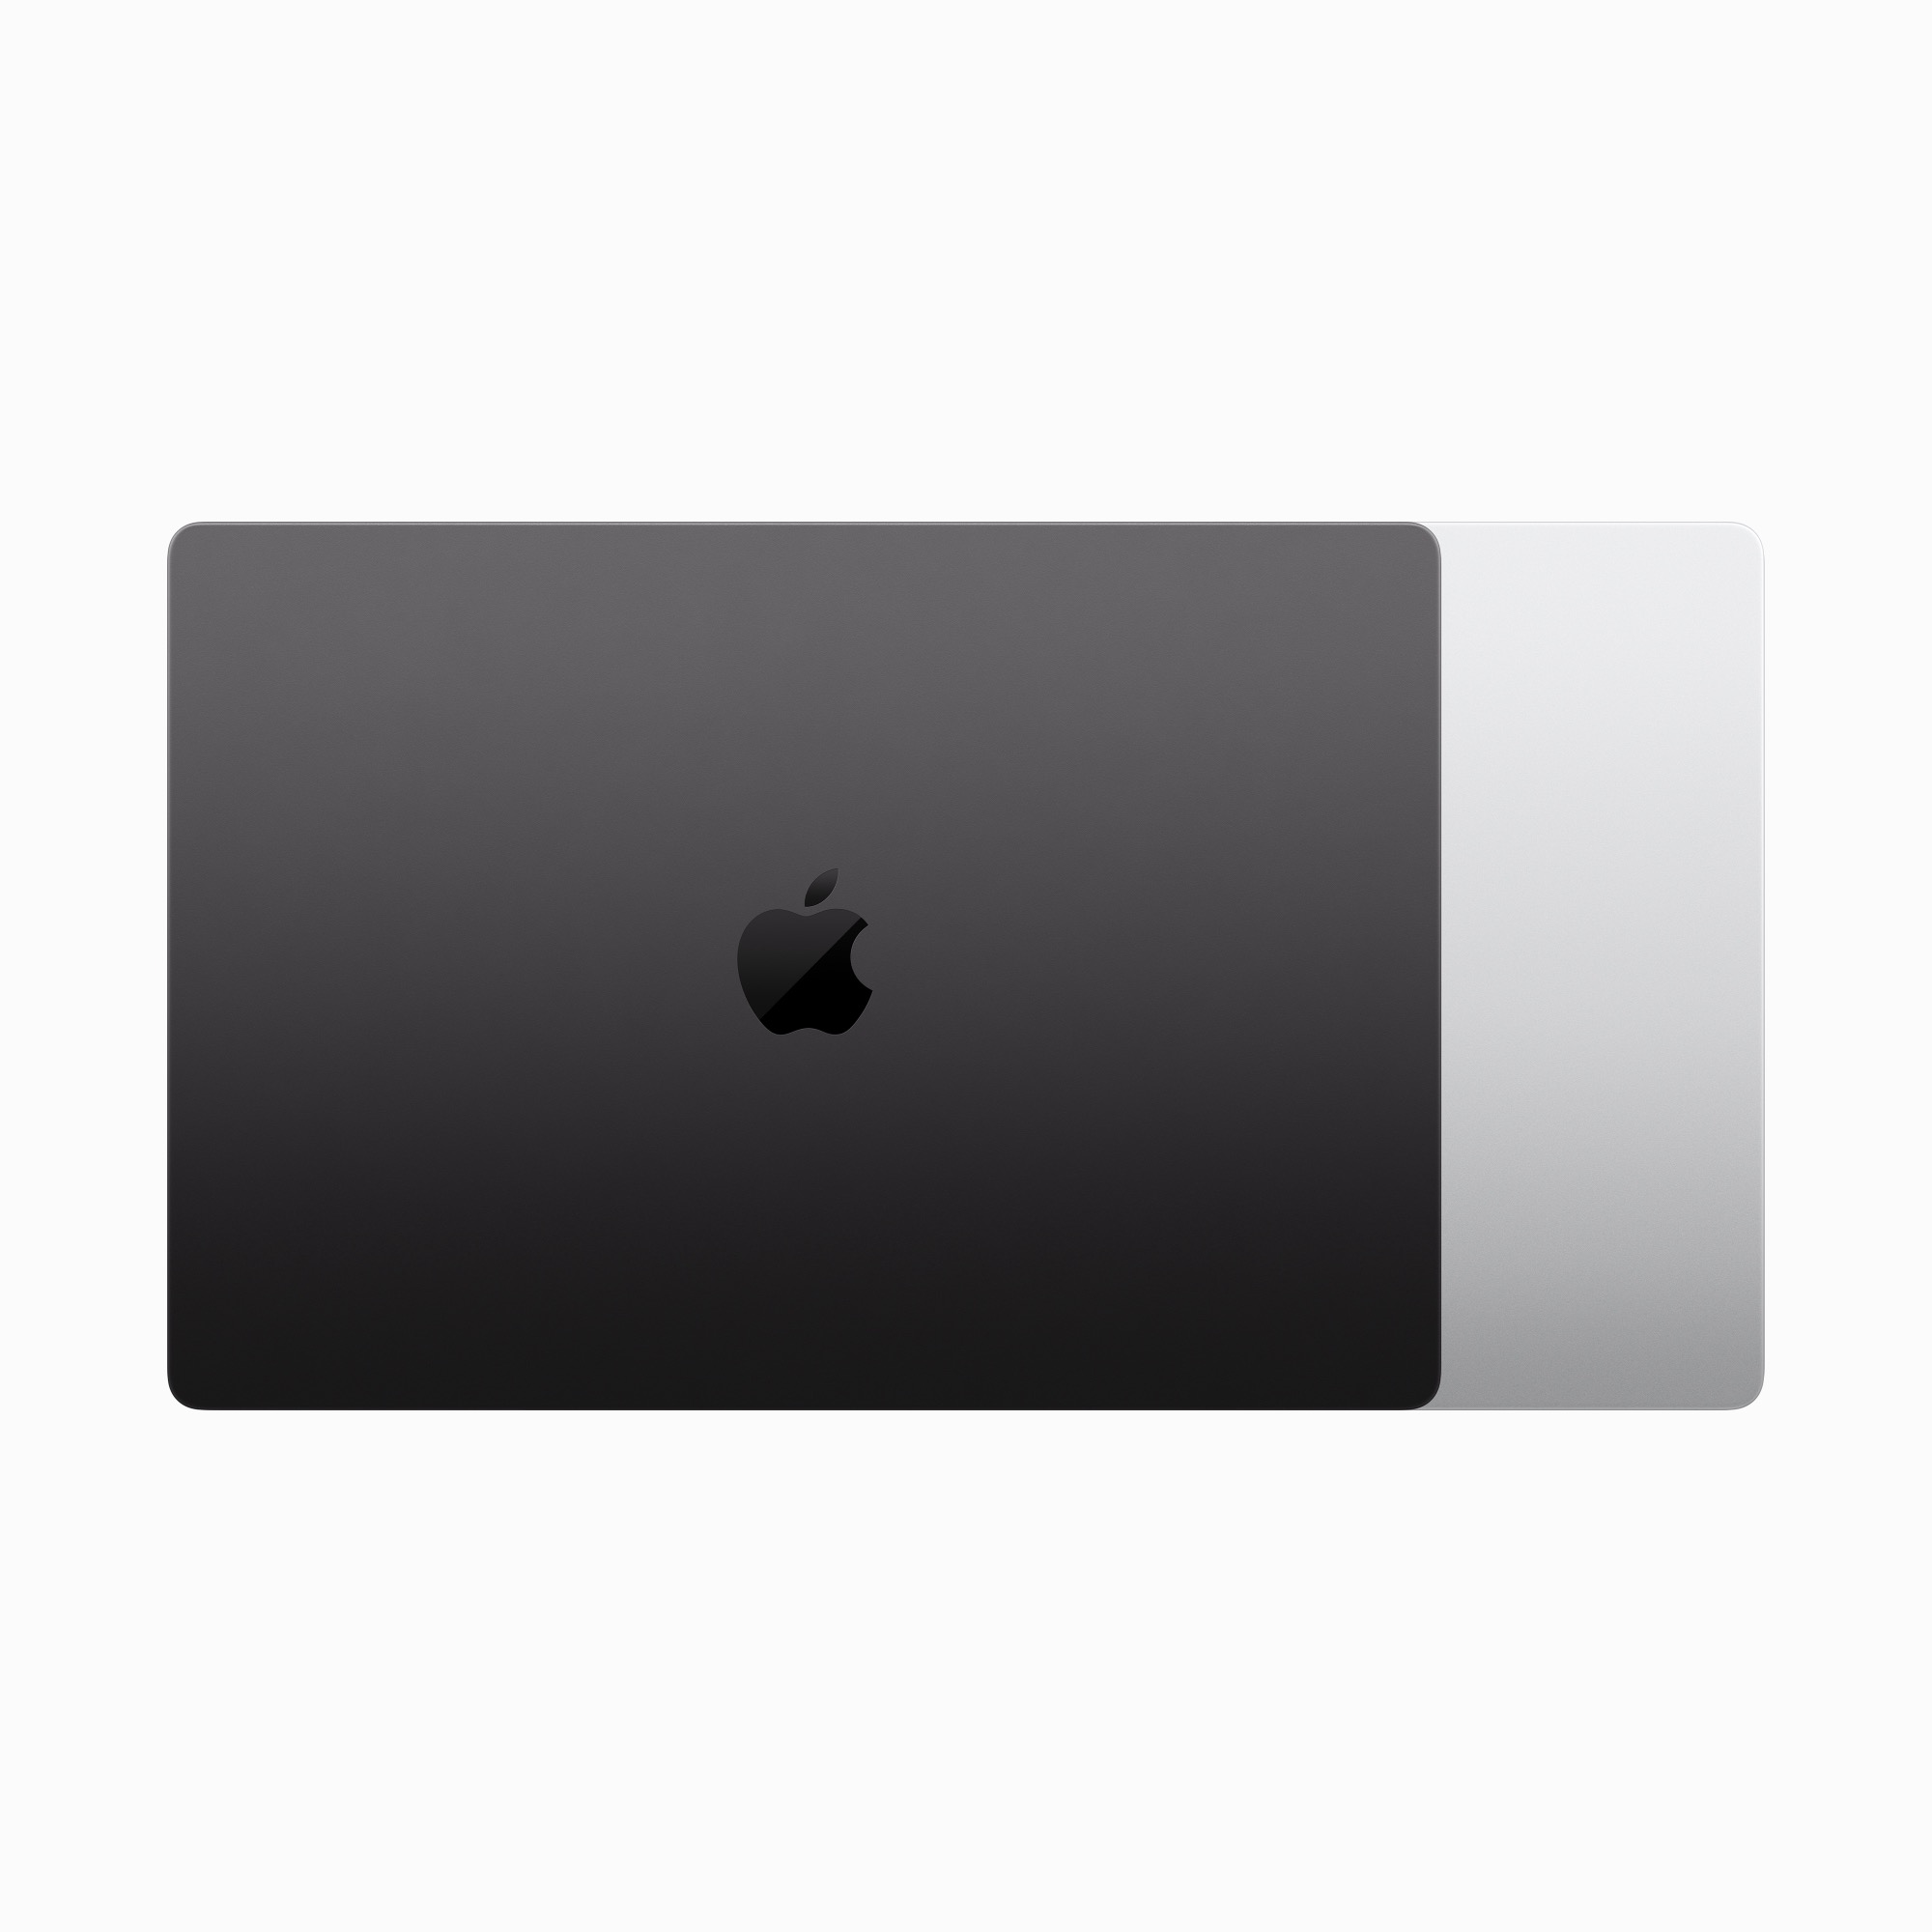 16-inch MacBook Pro: Apple M3 Max chip with 16c CPU and 40c GPU, 1TB SSD - Silver